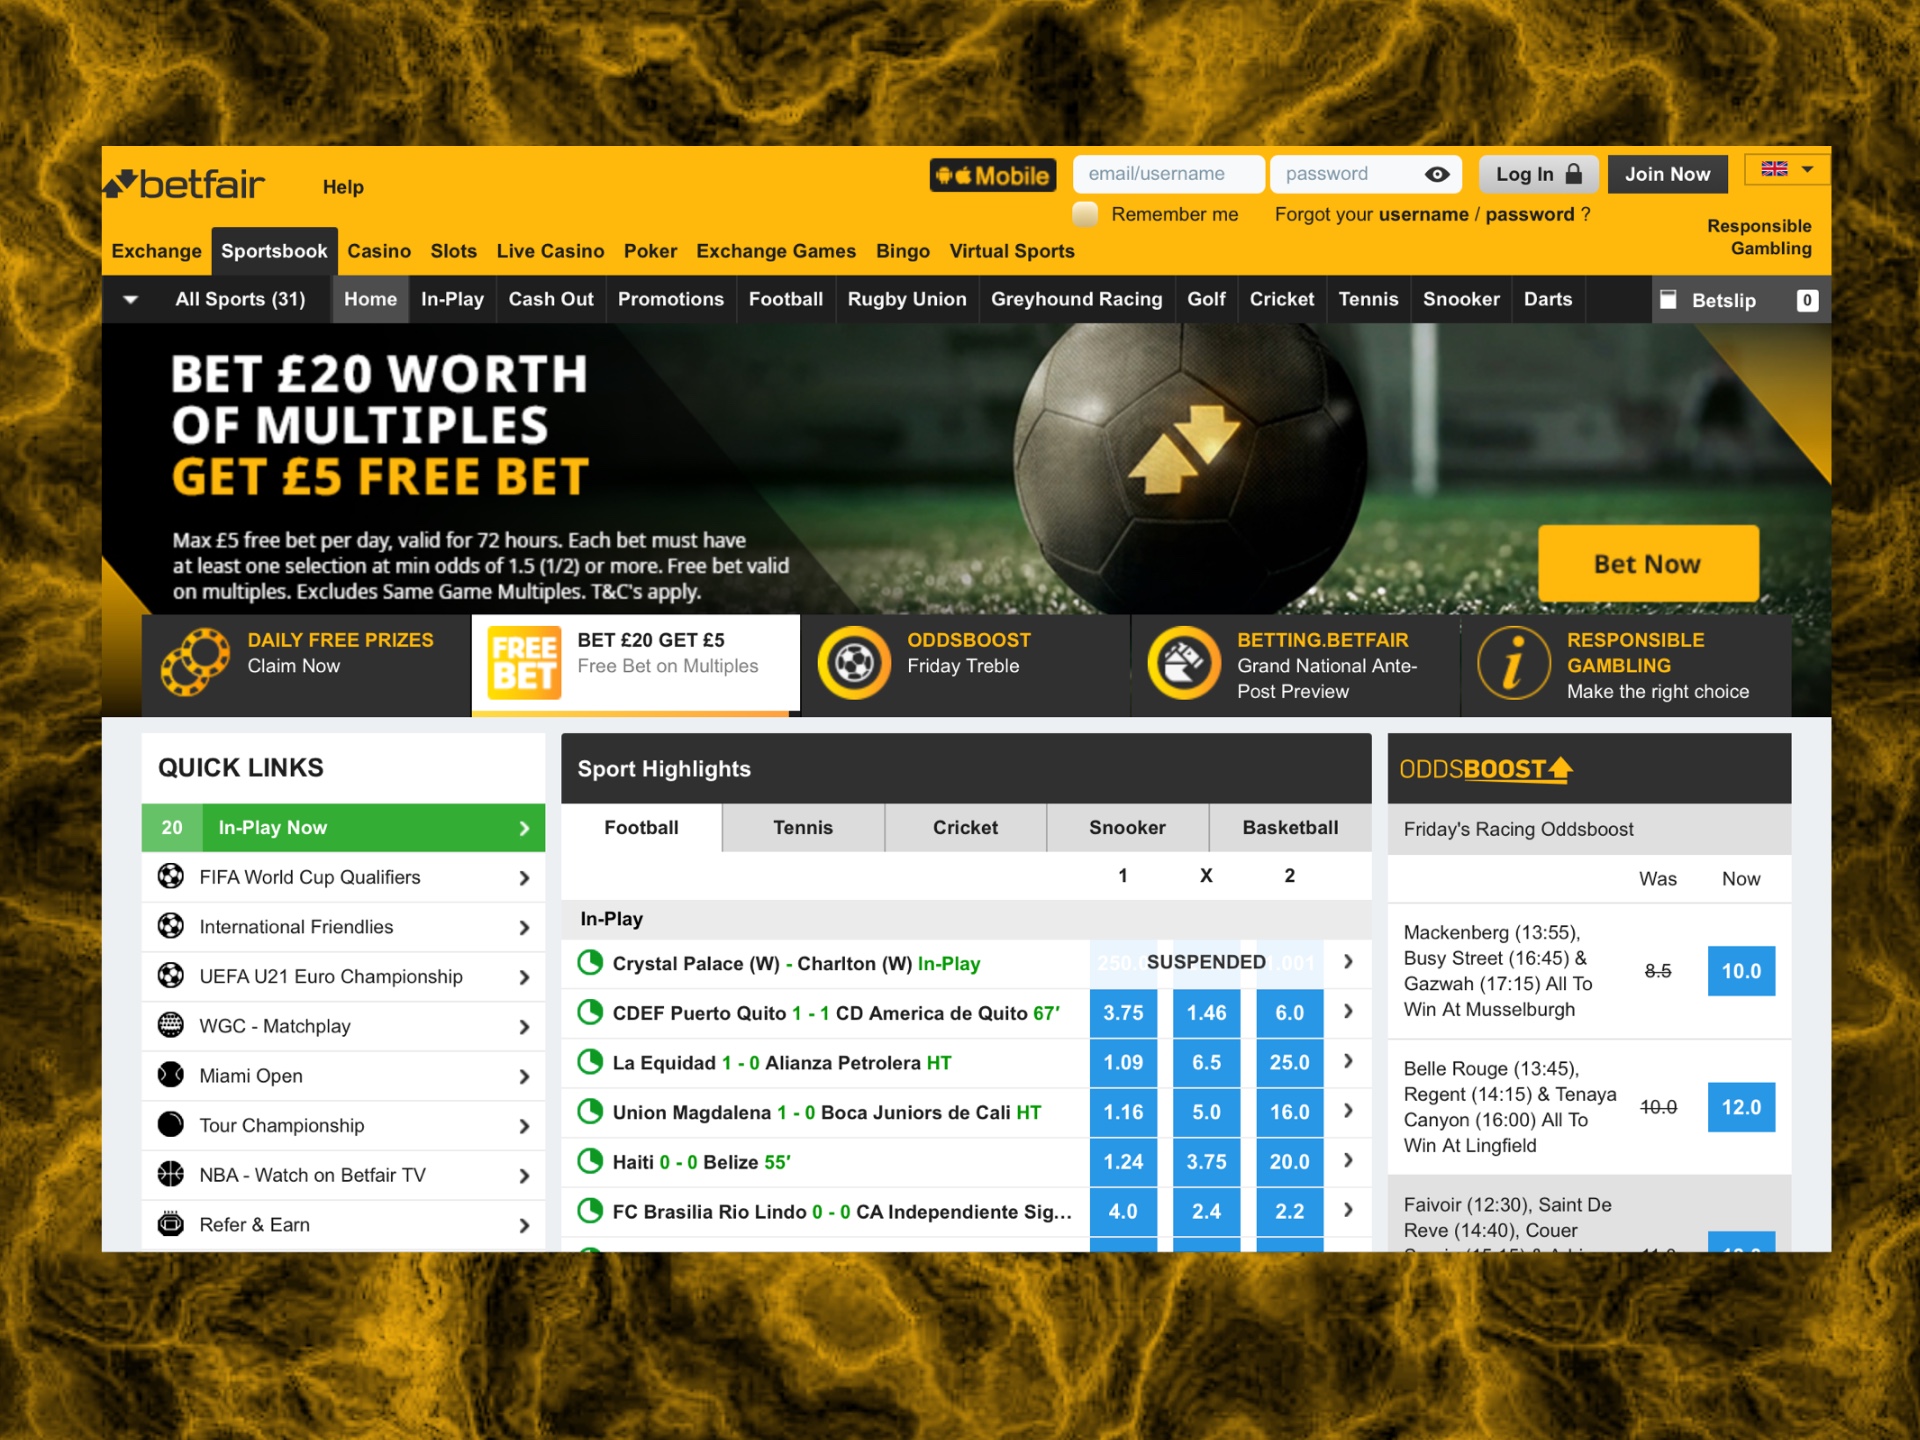 You can also place bets on different sport games and events at Betfair.